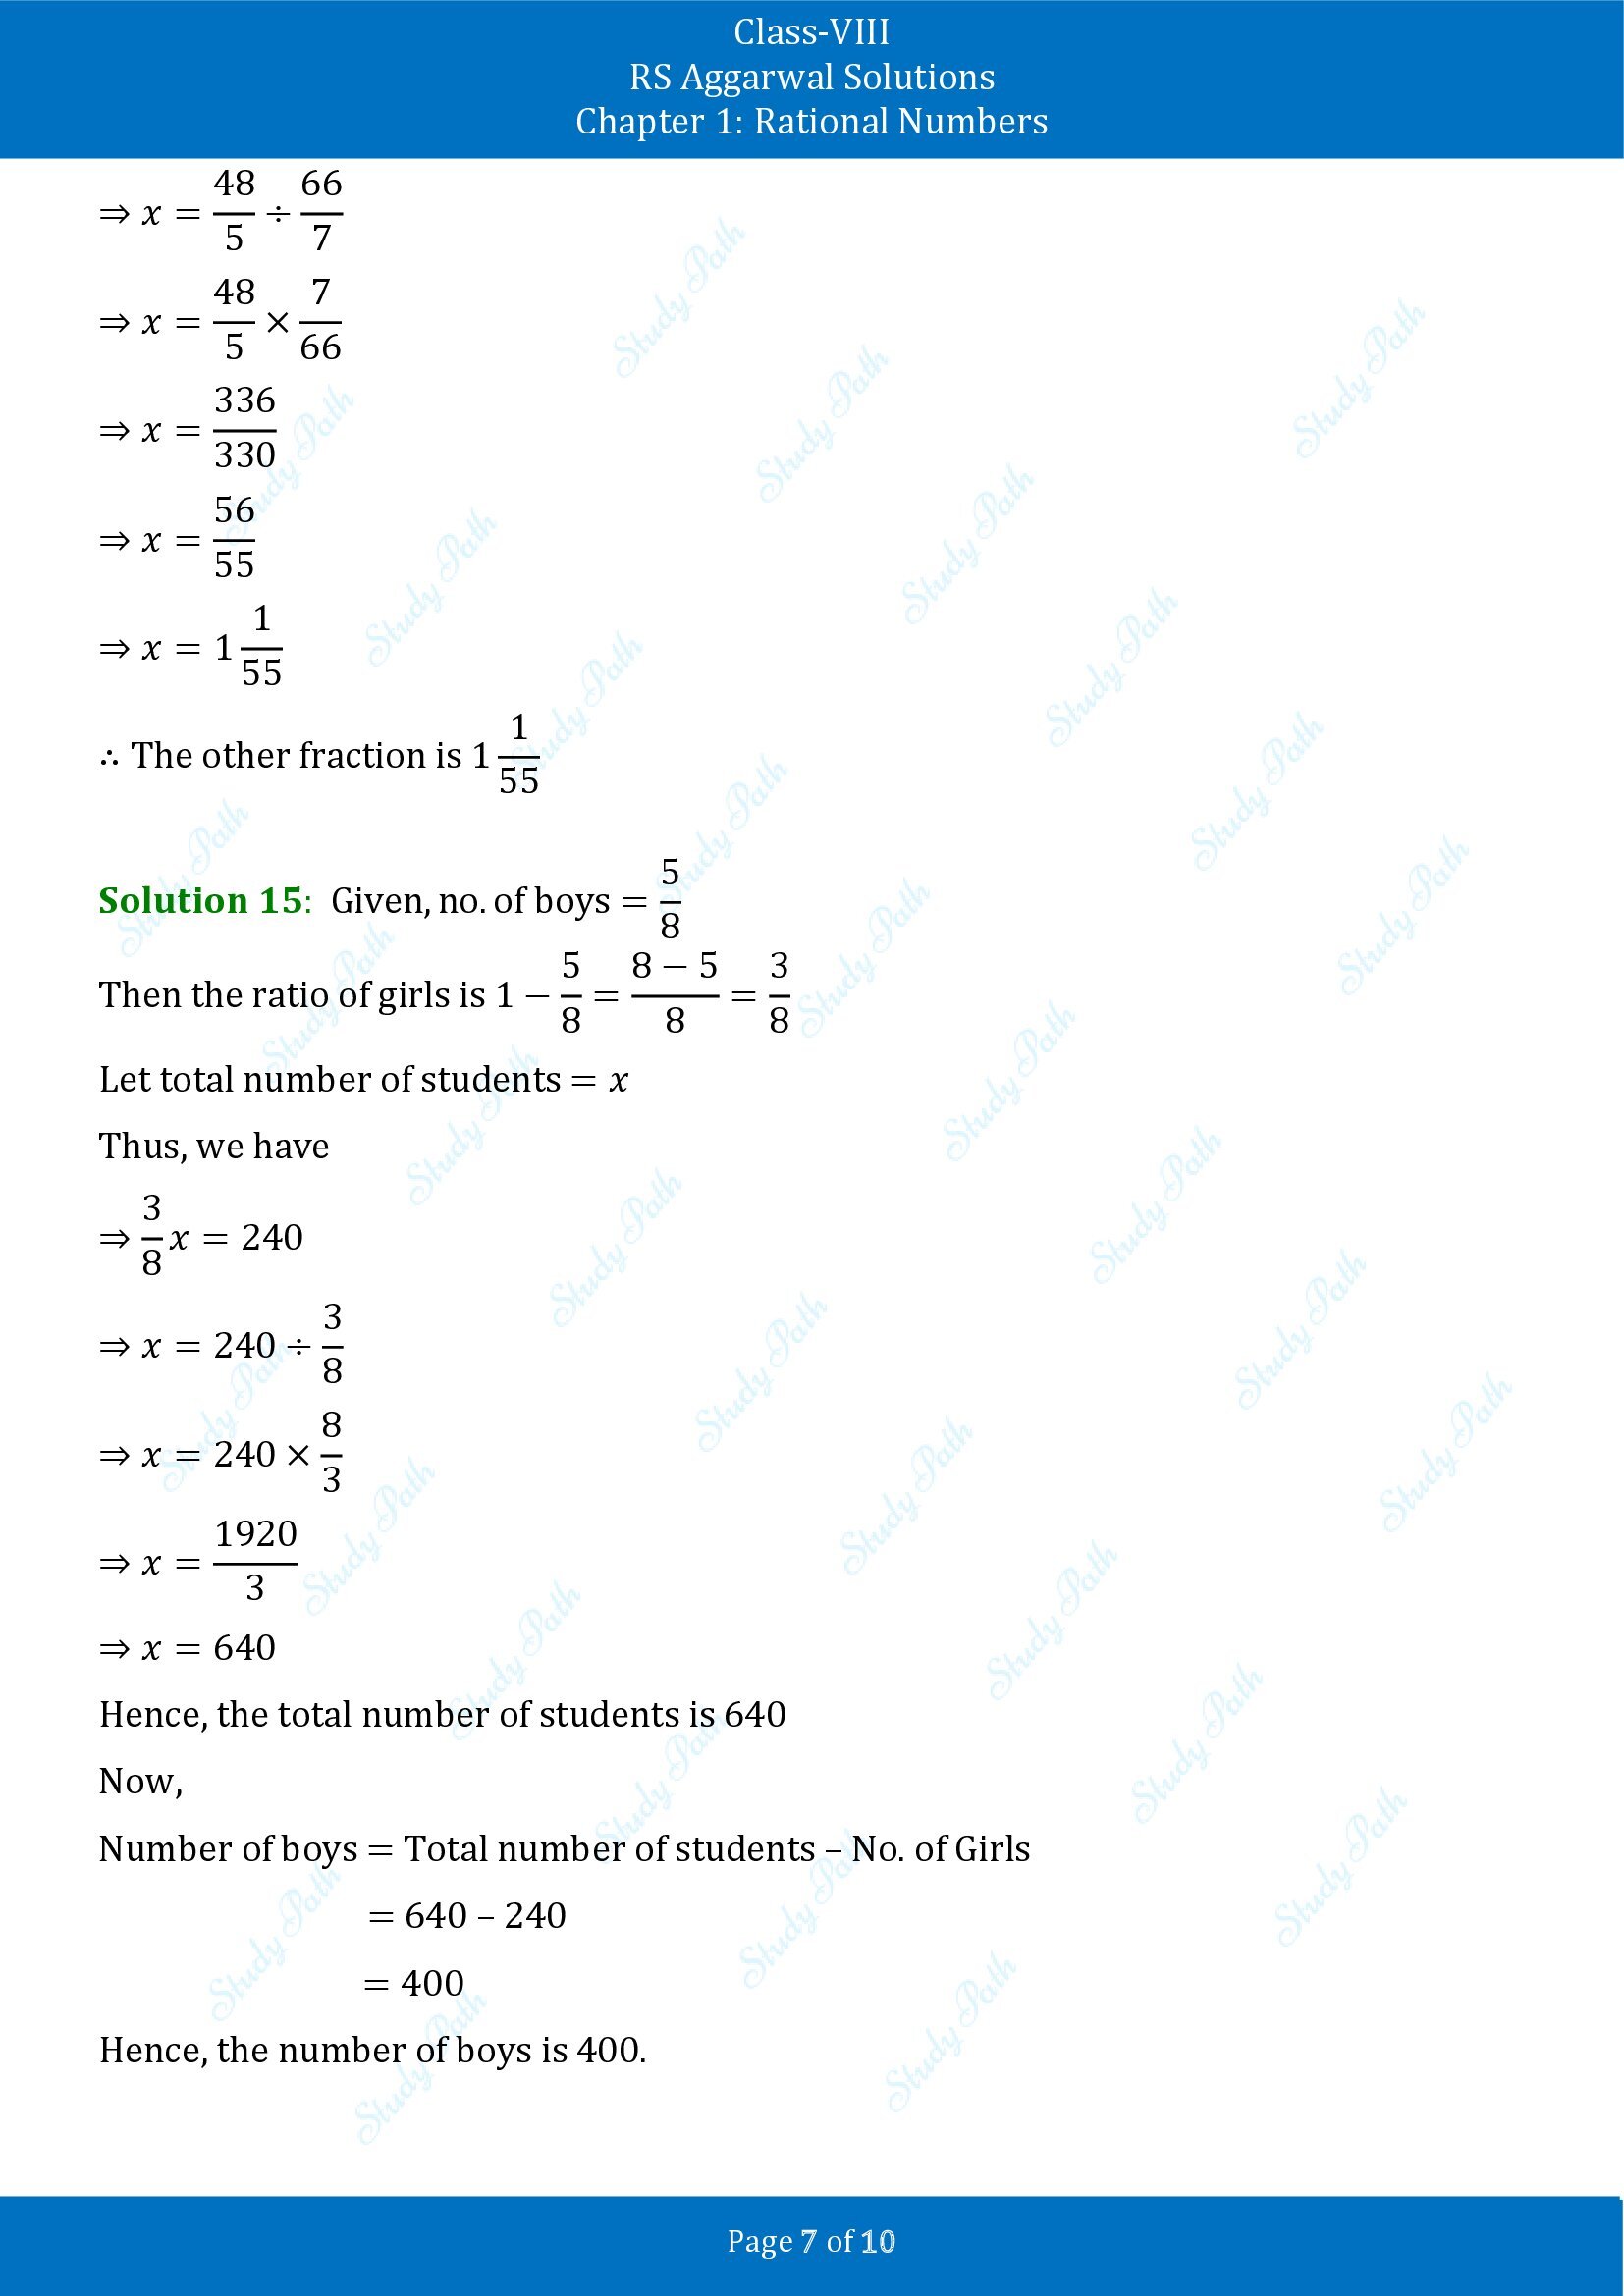 RS Aggarwal Solutions Class 8 Chapter 1 Rational Numbers Exercise 1G 00007